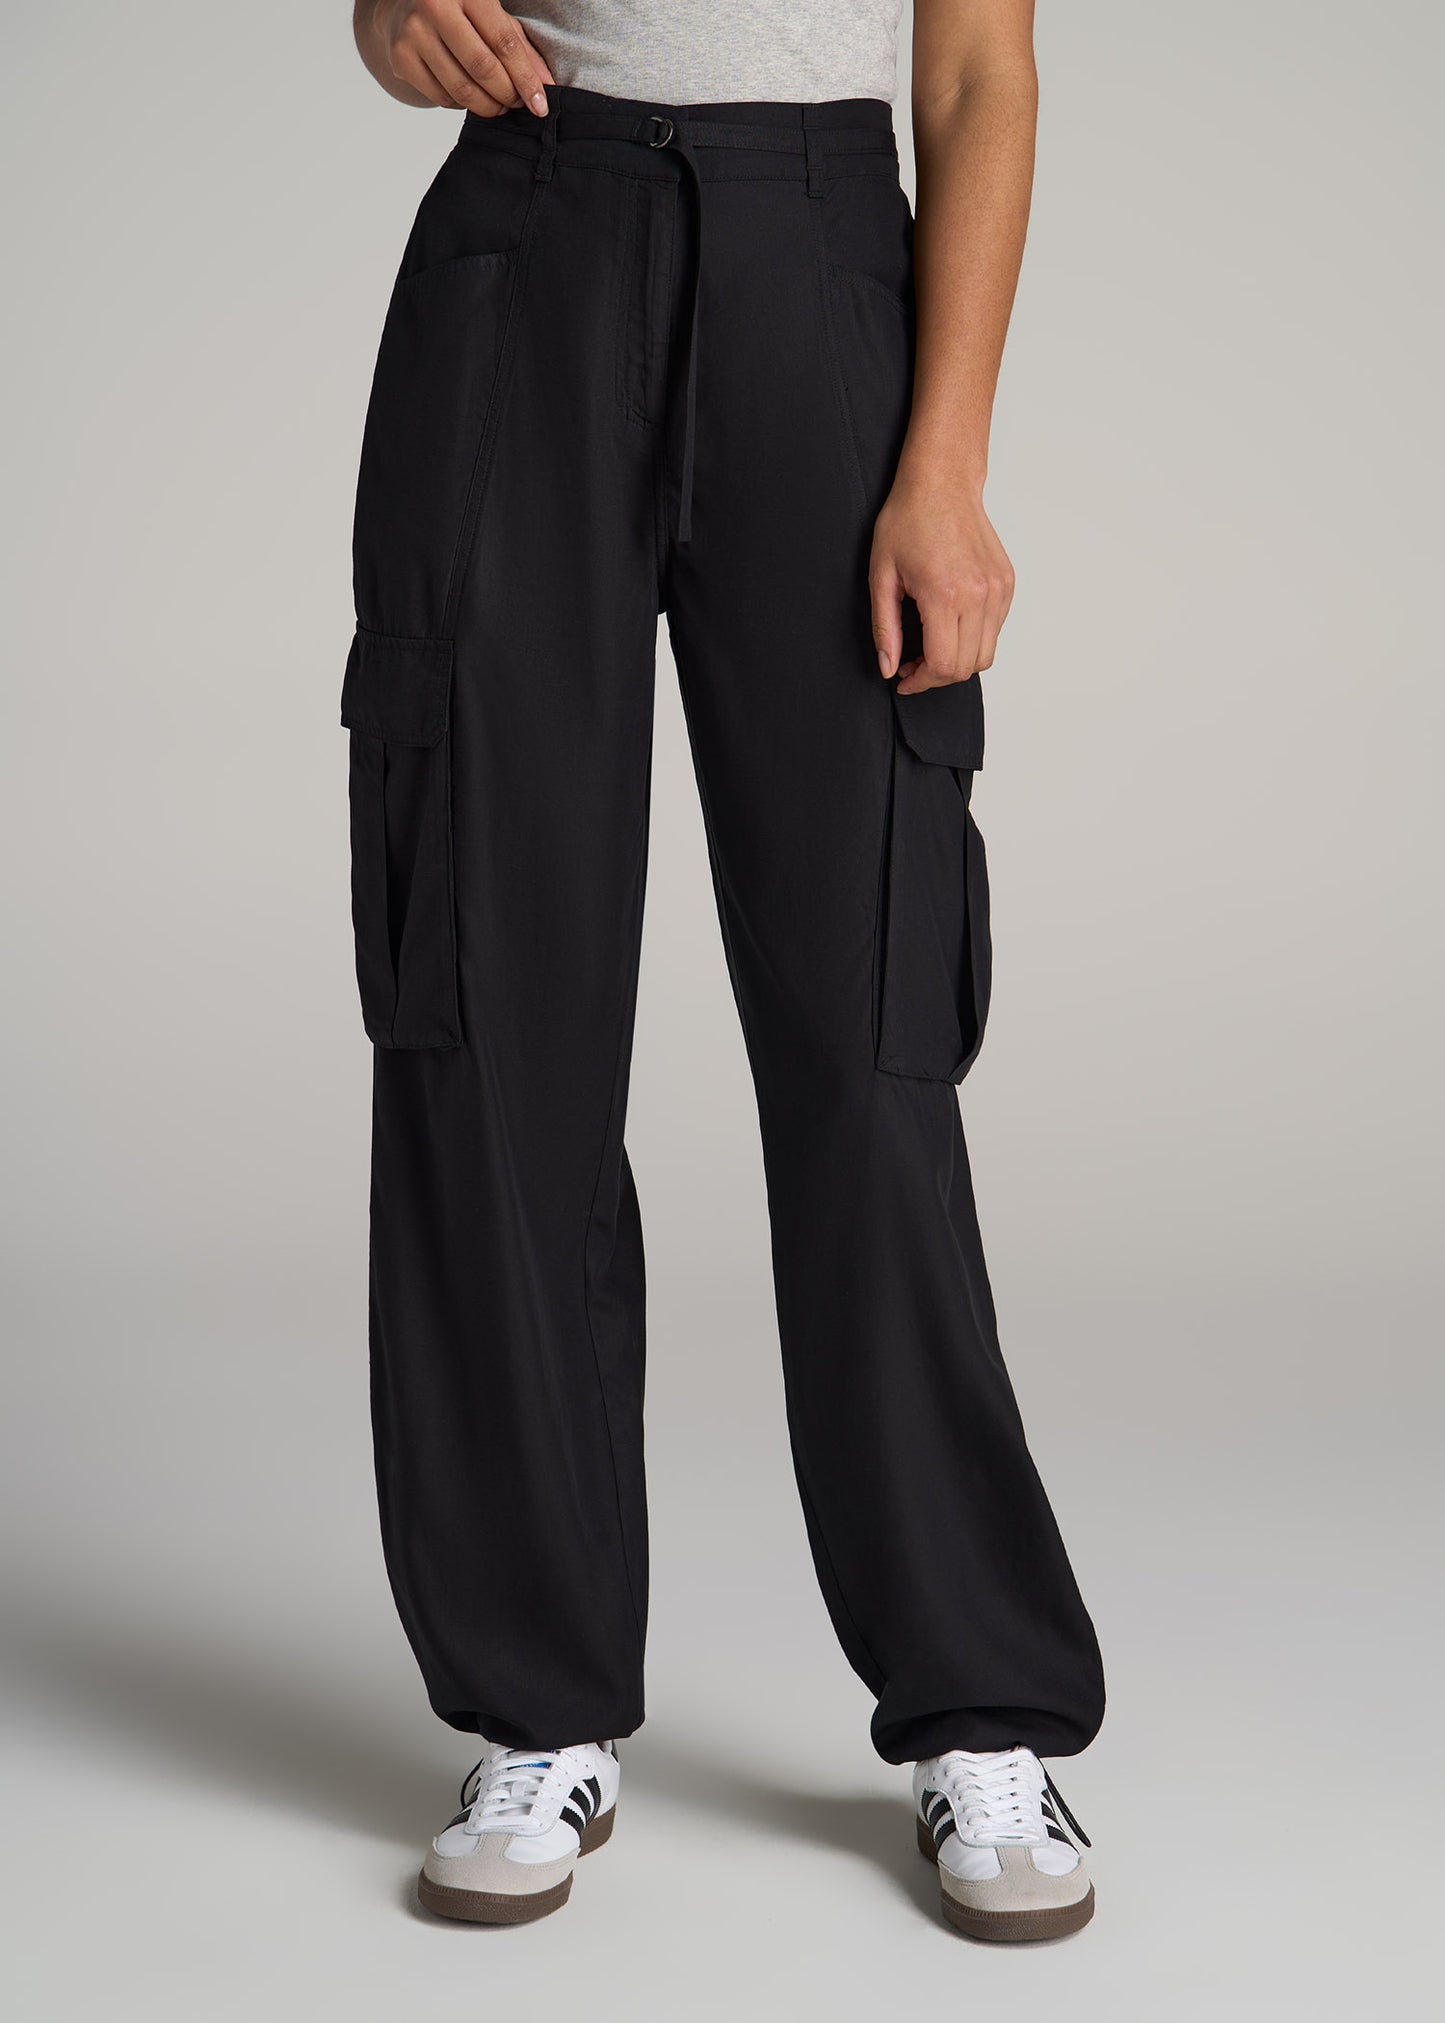 High Rise Cargo Parachute Pants for Tall Women in Black